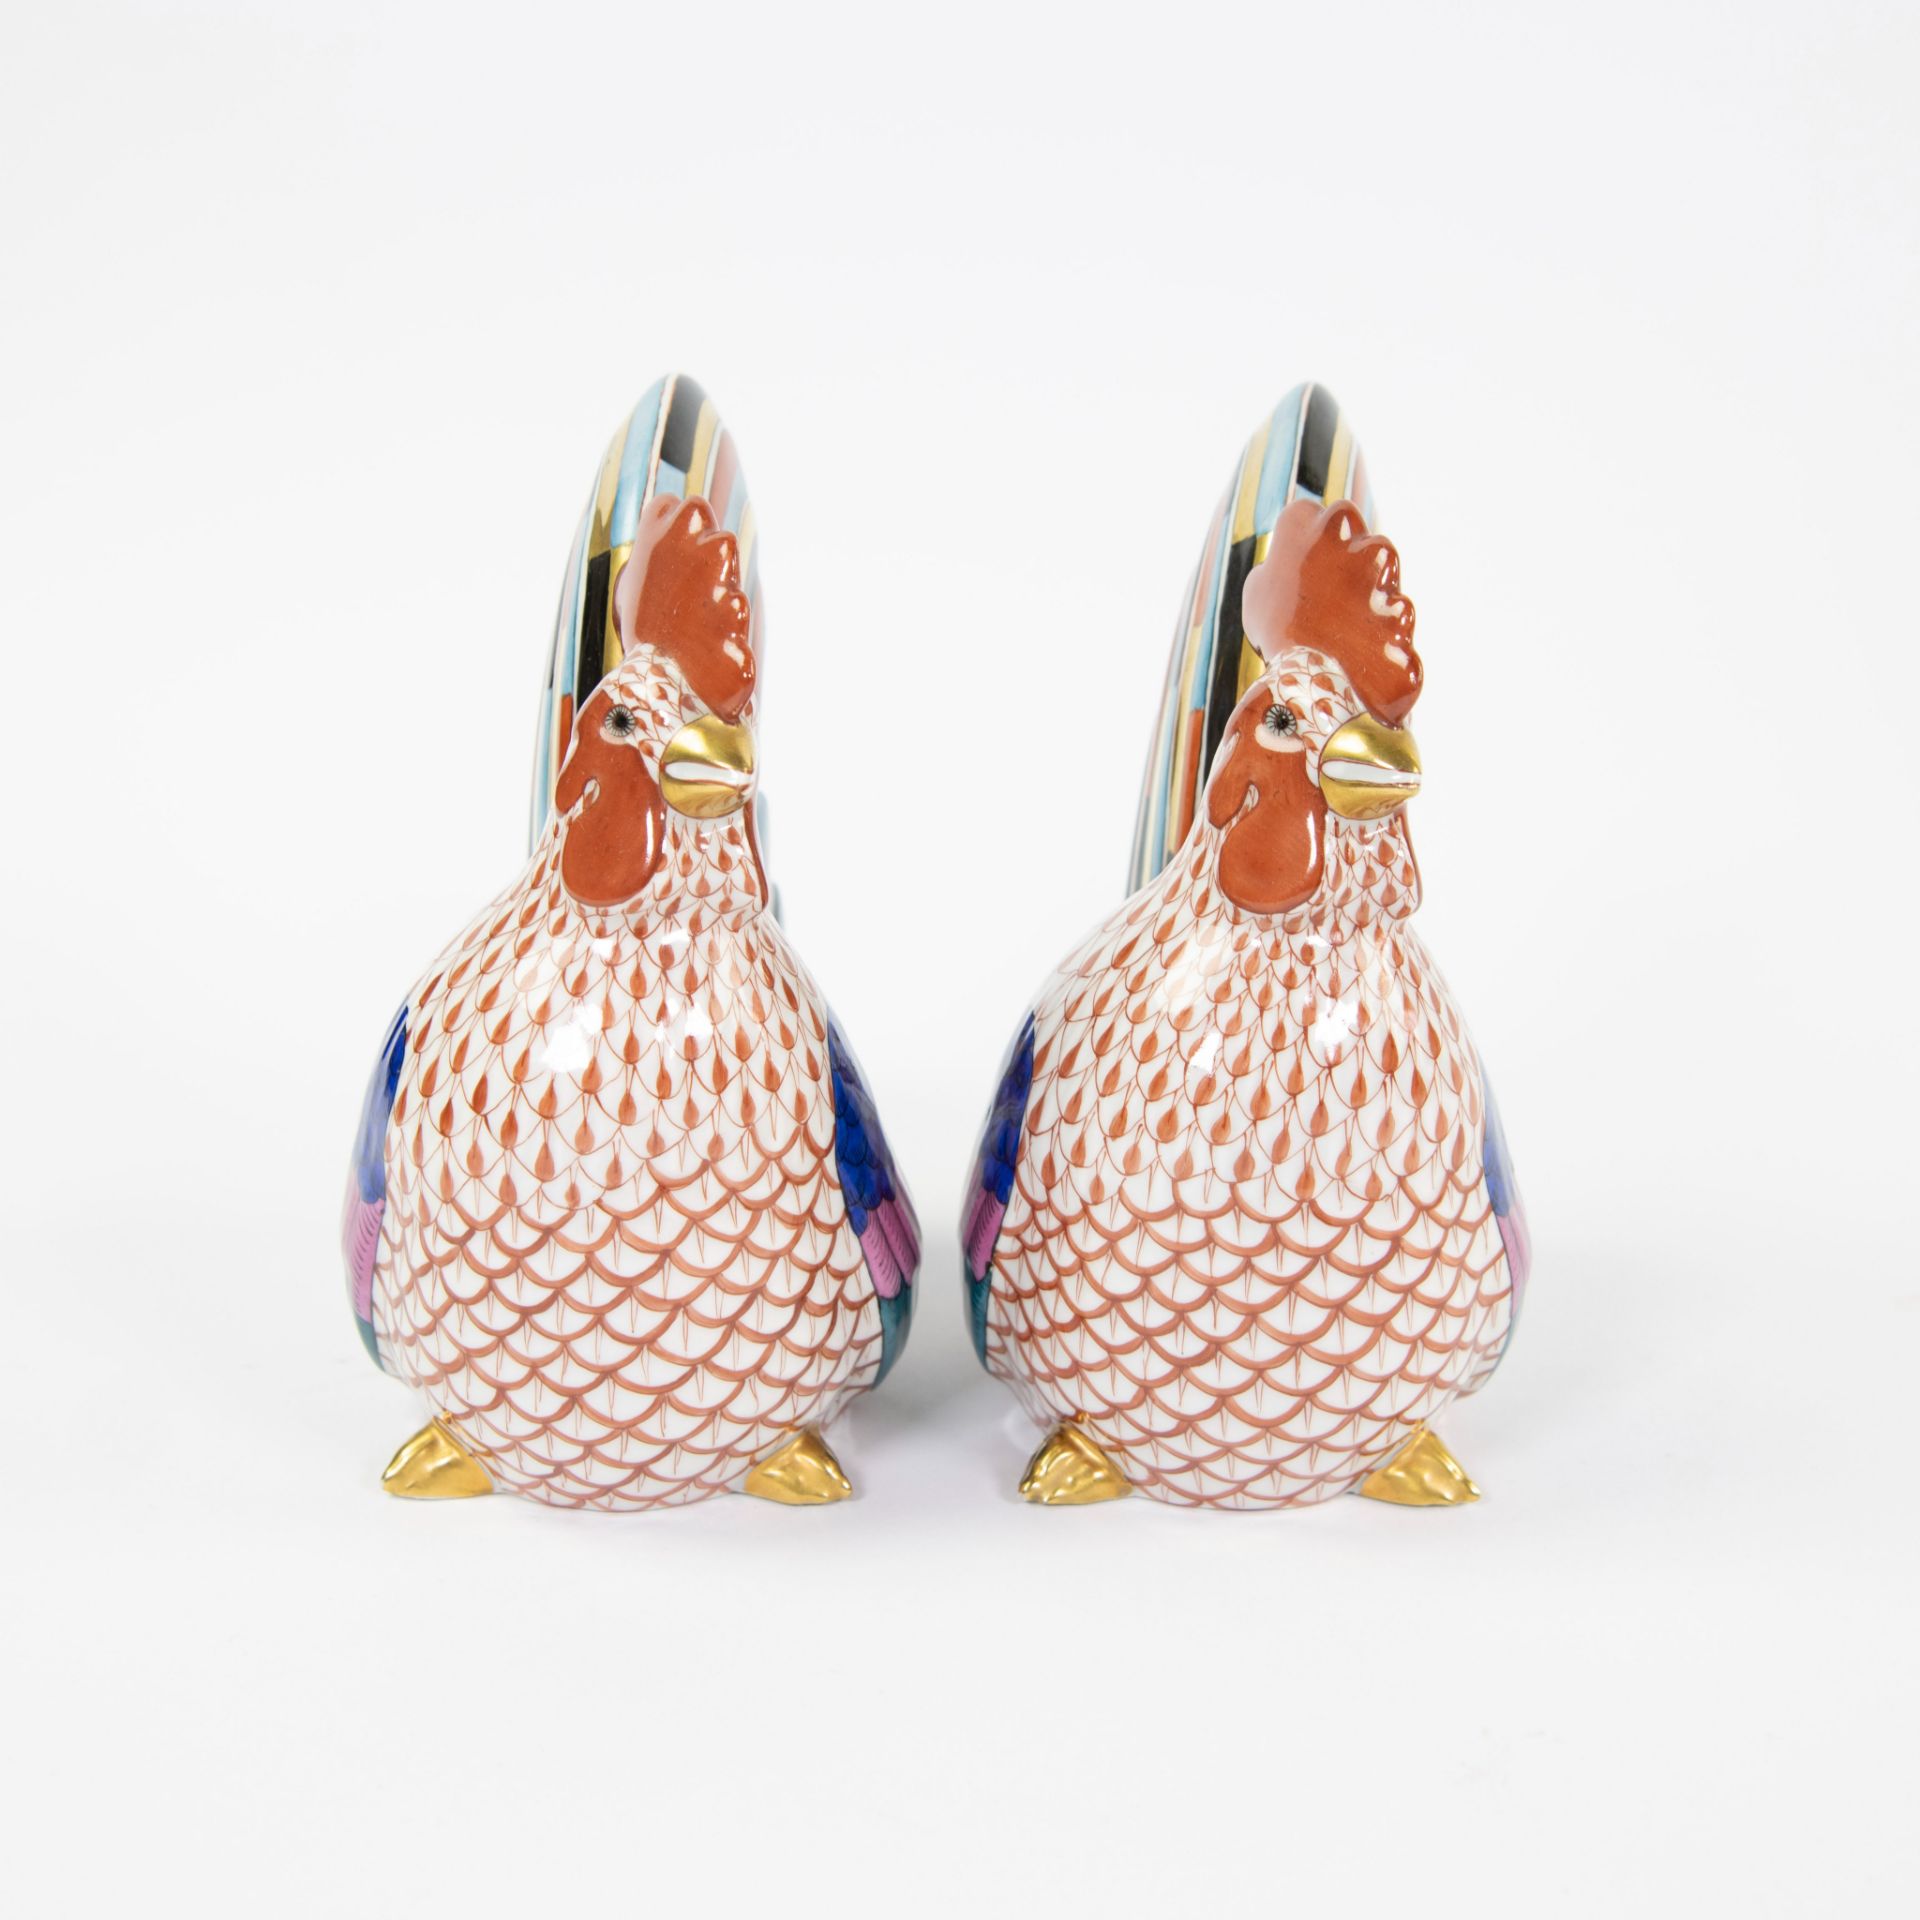 Pair of Herend roosters in porcelain hand-painted decoration in gold-green-blue-black-pink. marked. - Image 5 of 8